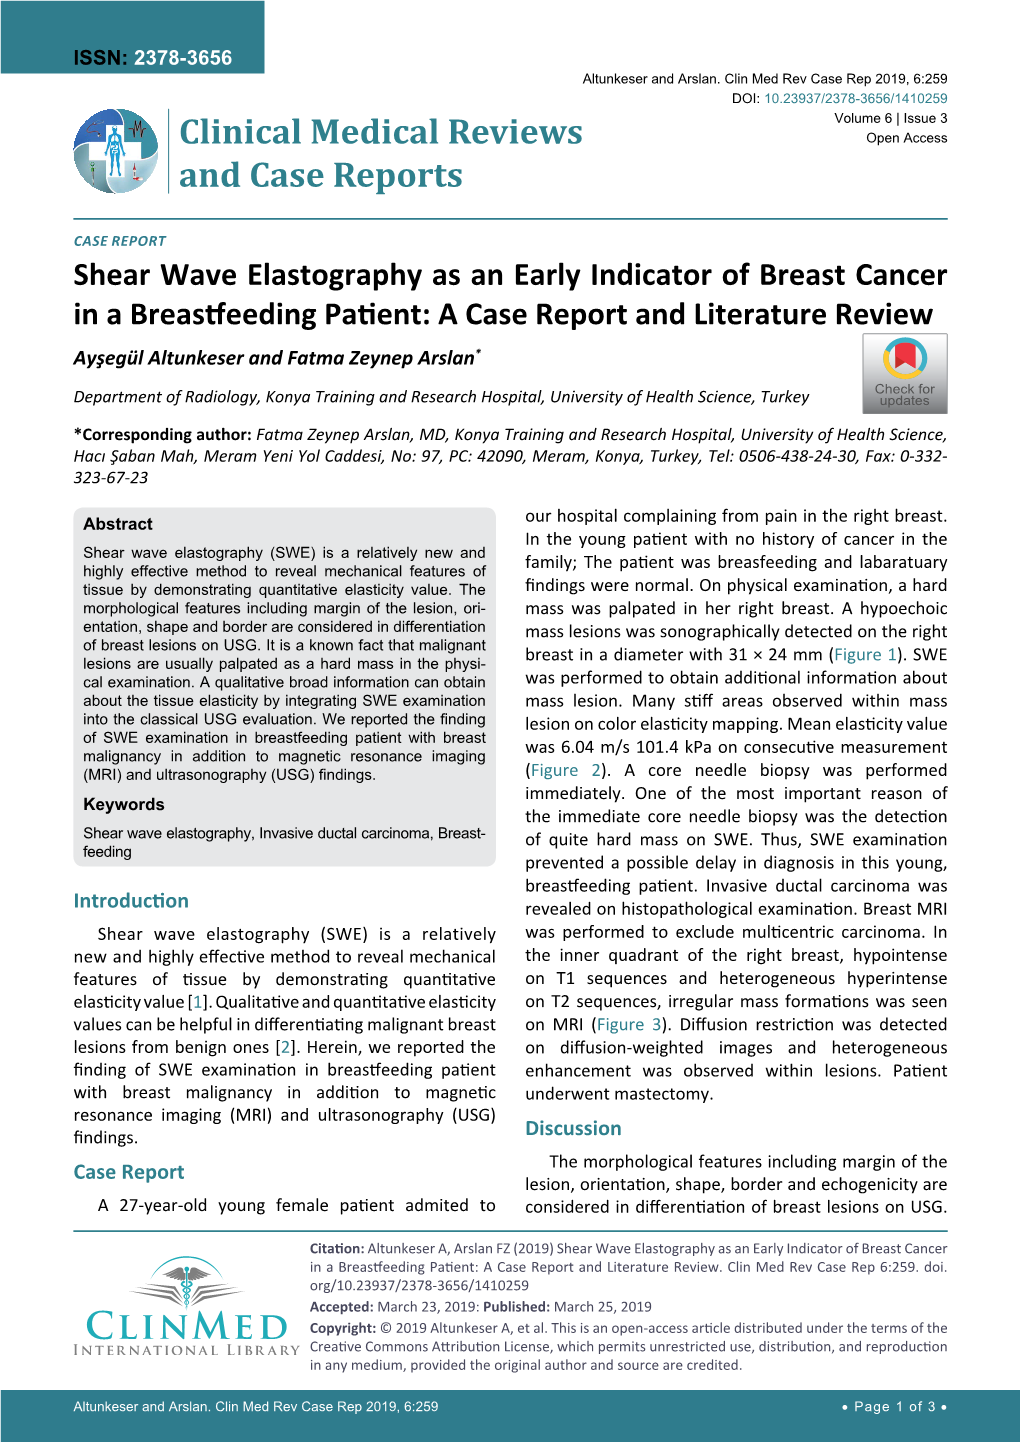 Shear Wave Elastography As an Early Indicator of Breast Cancer in A